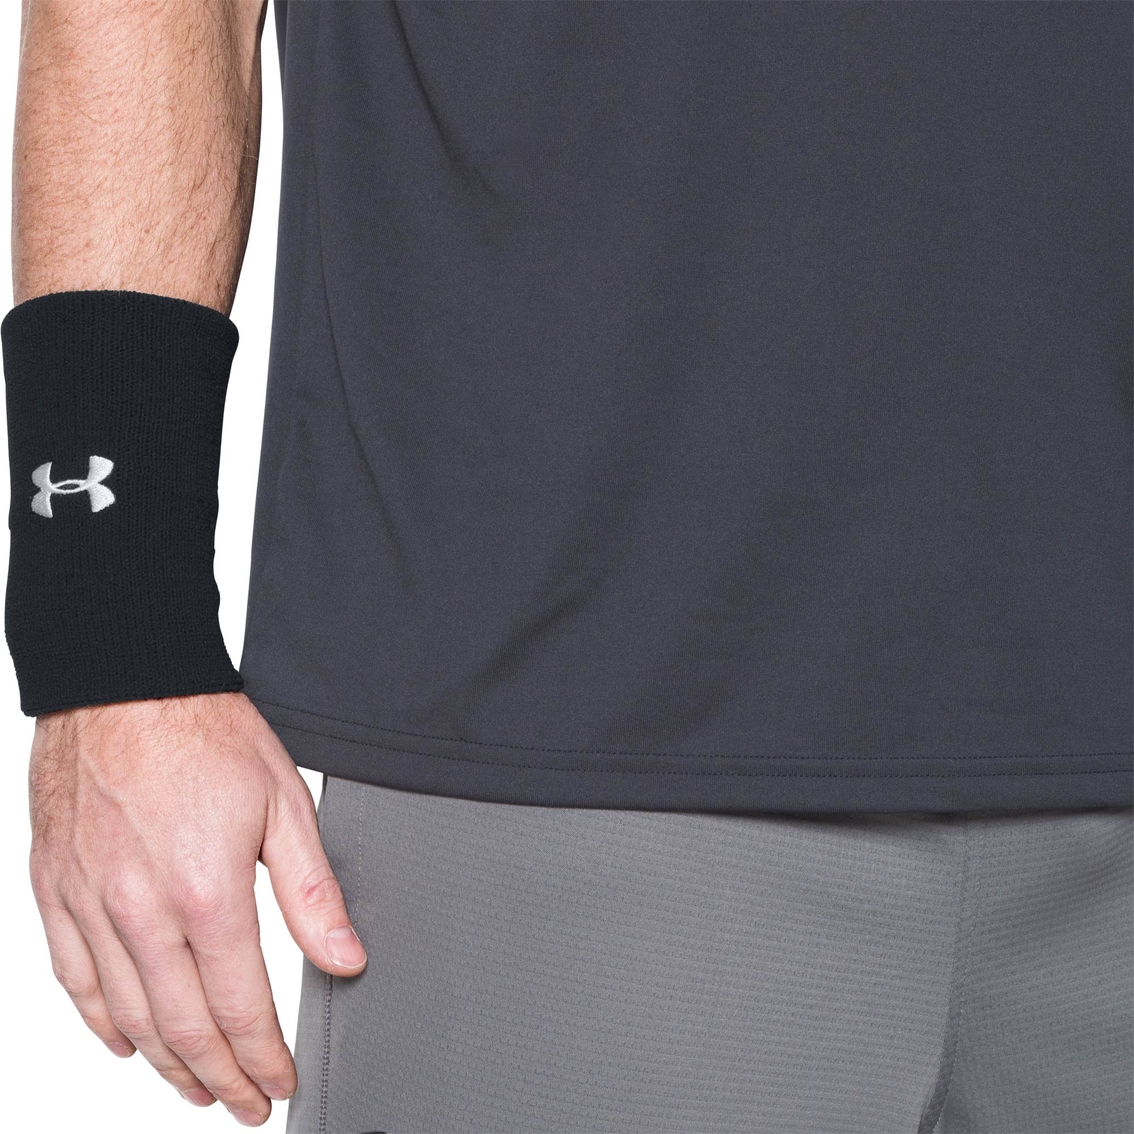 Under Armour 6 in. Performance Wristband - Image 2 of 2